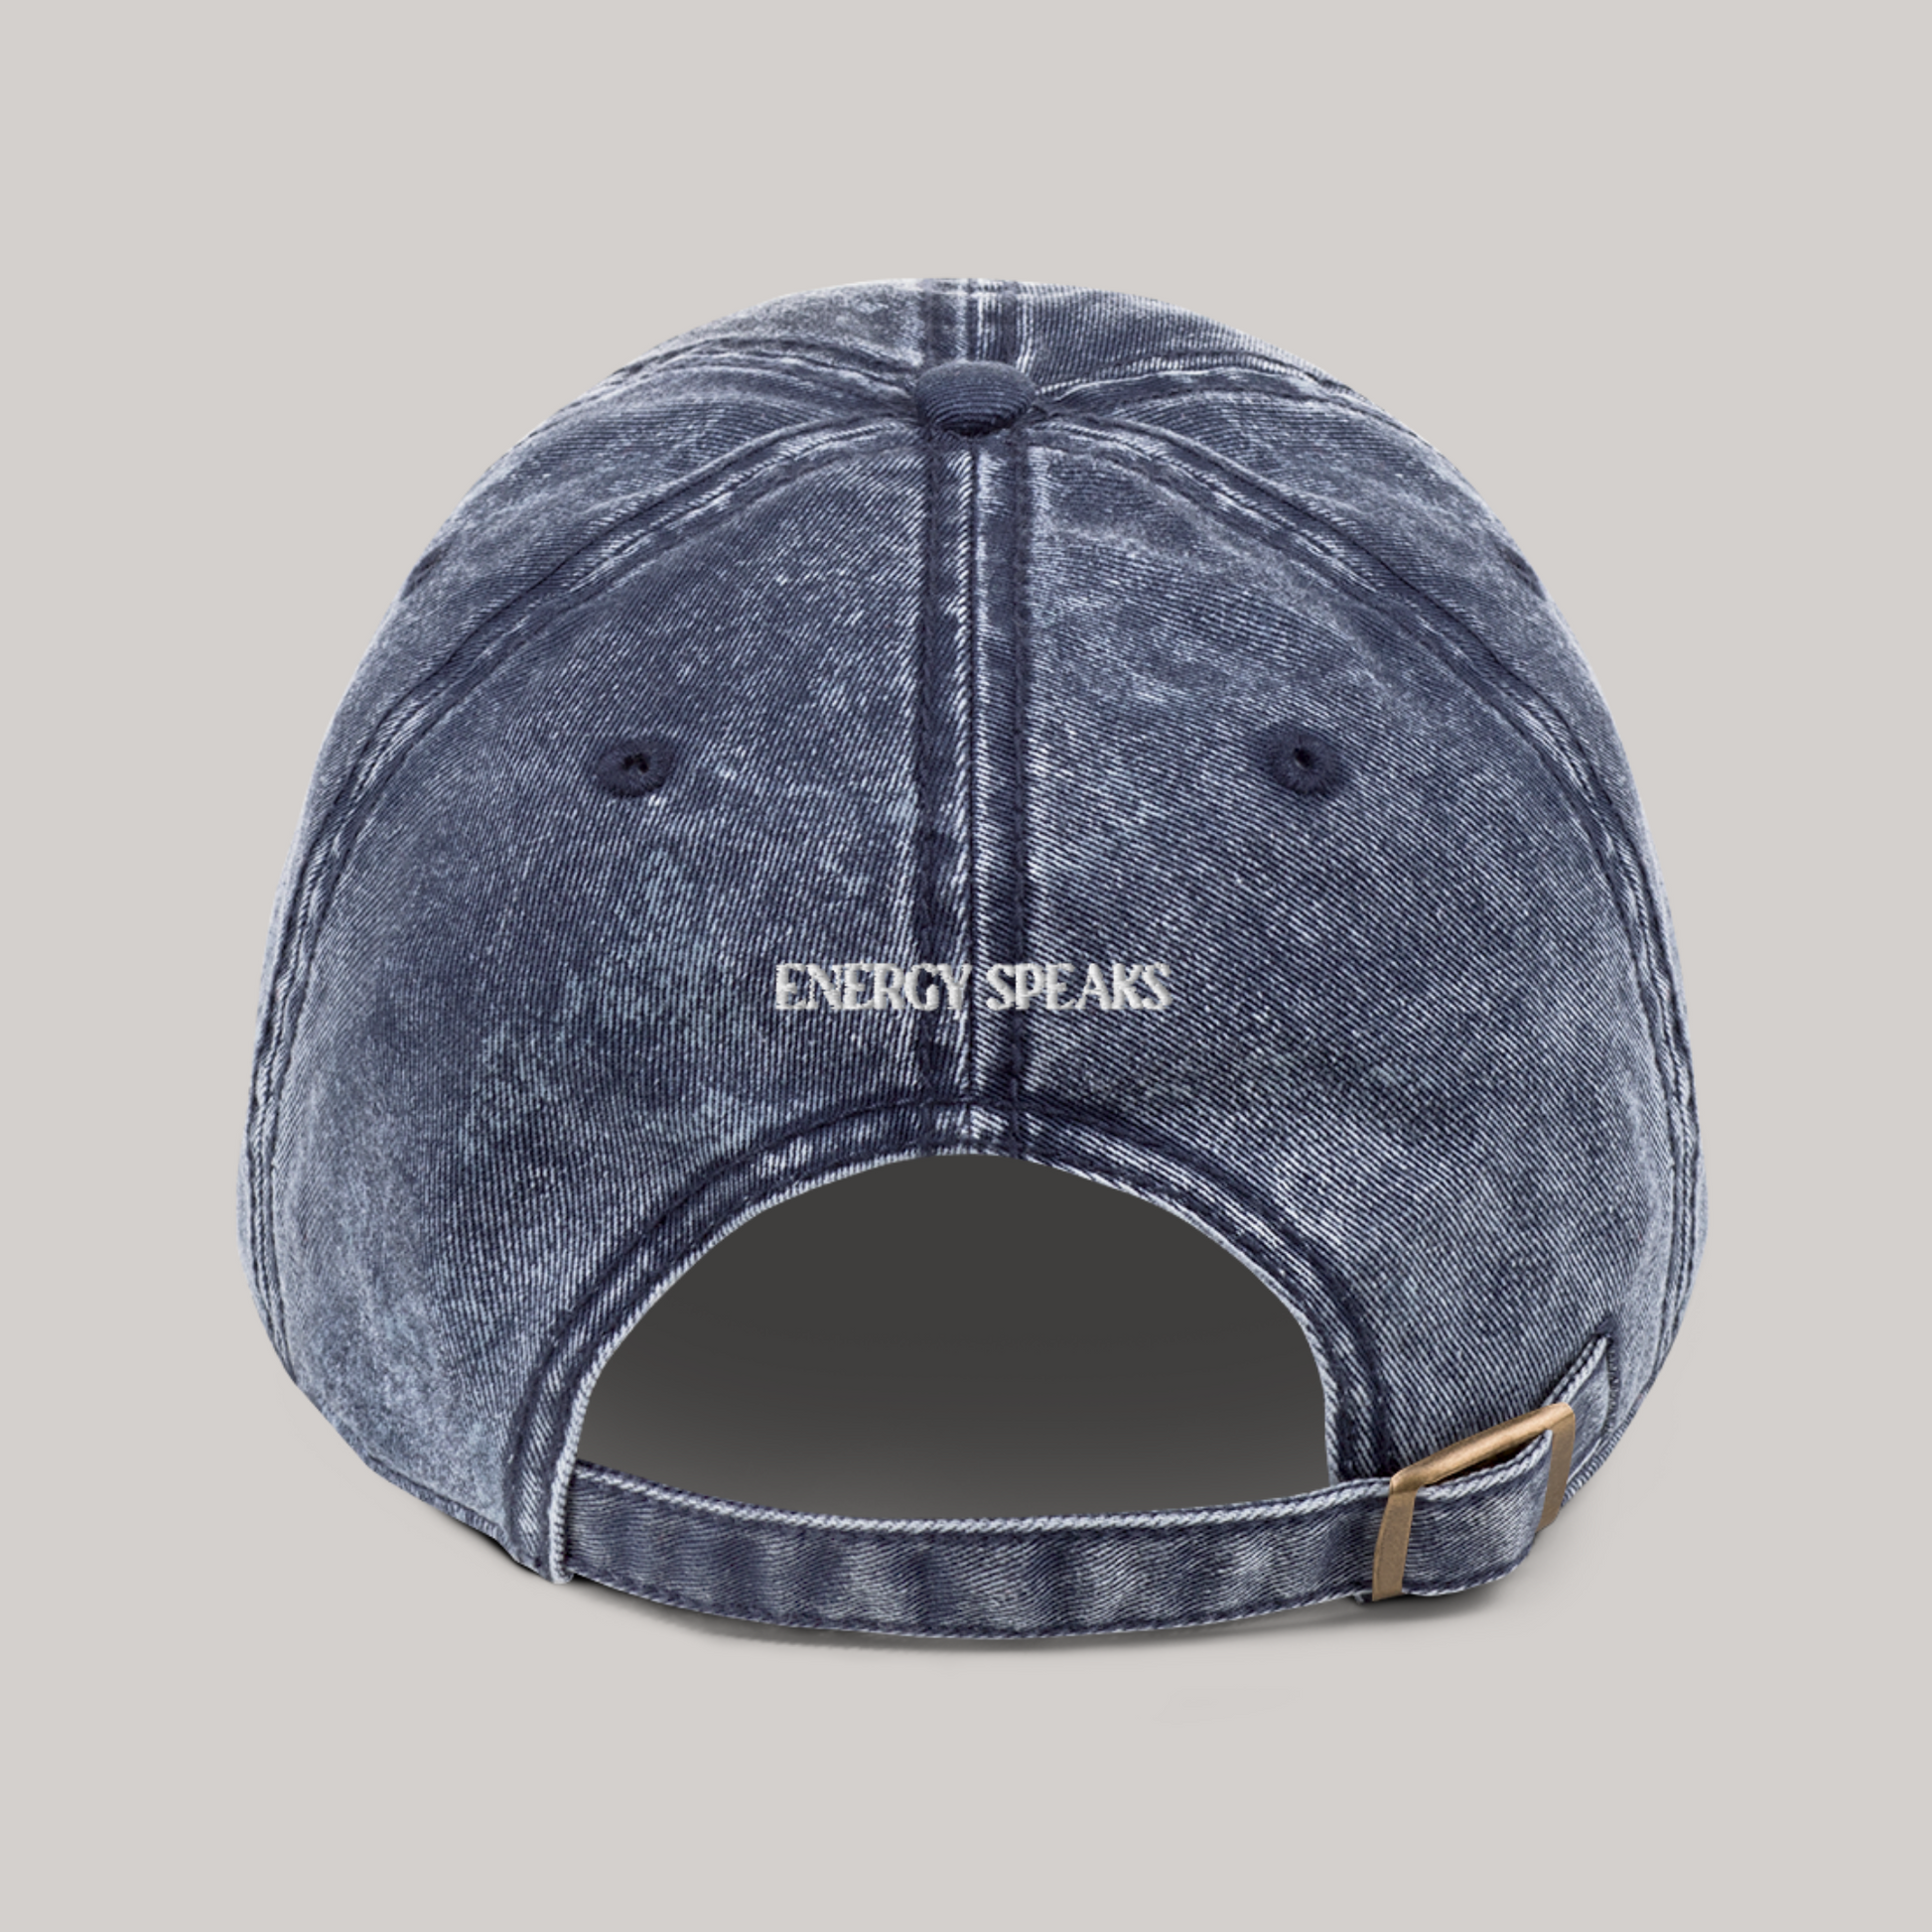 Back side of cap: cotton twill, washed out vintage denim look, 'energy speaks' back embroidery. Strap closed